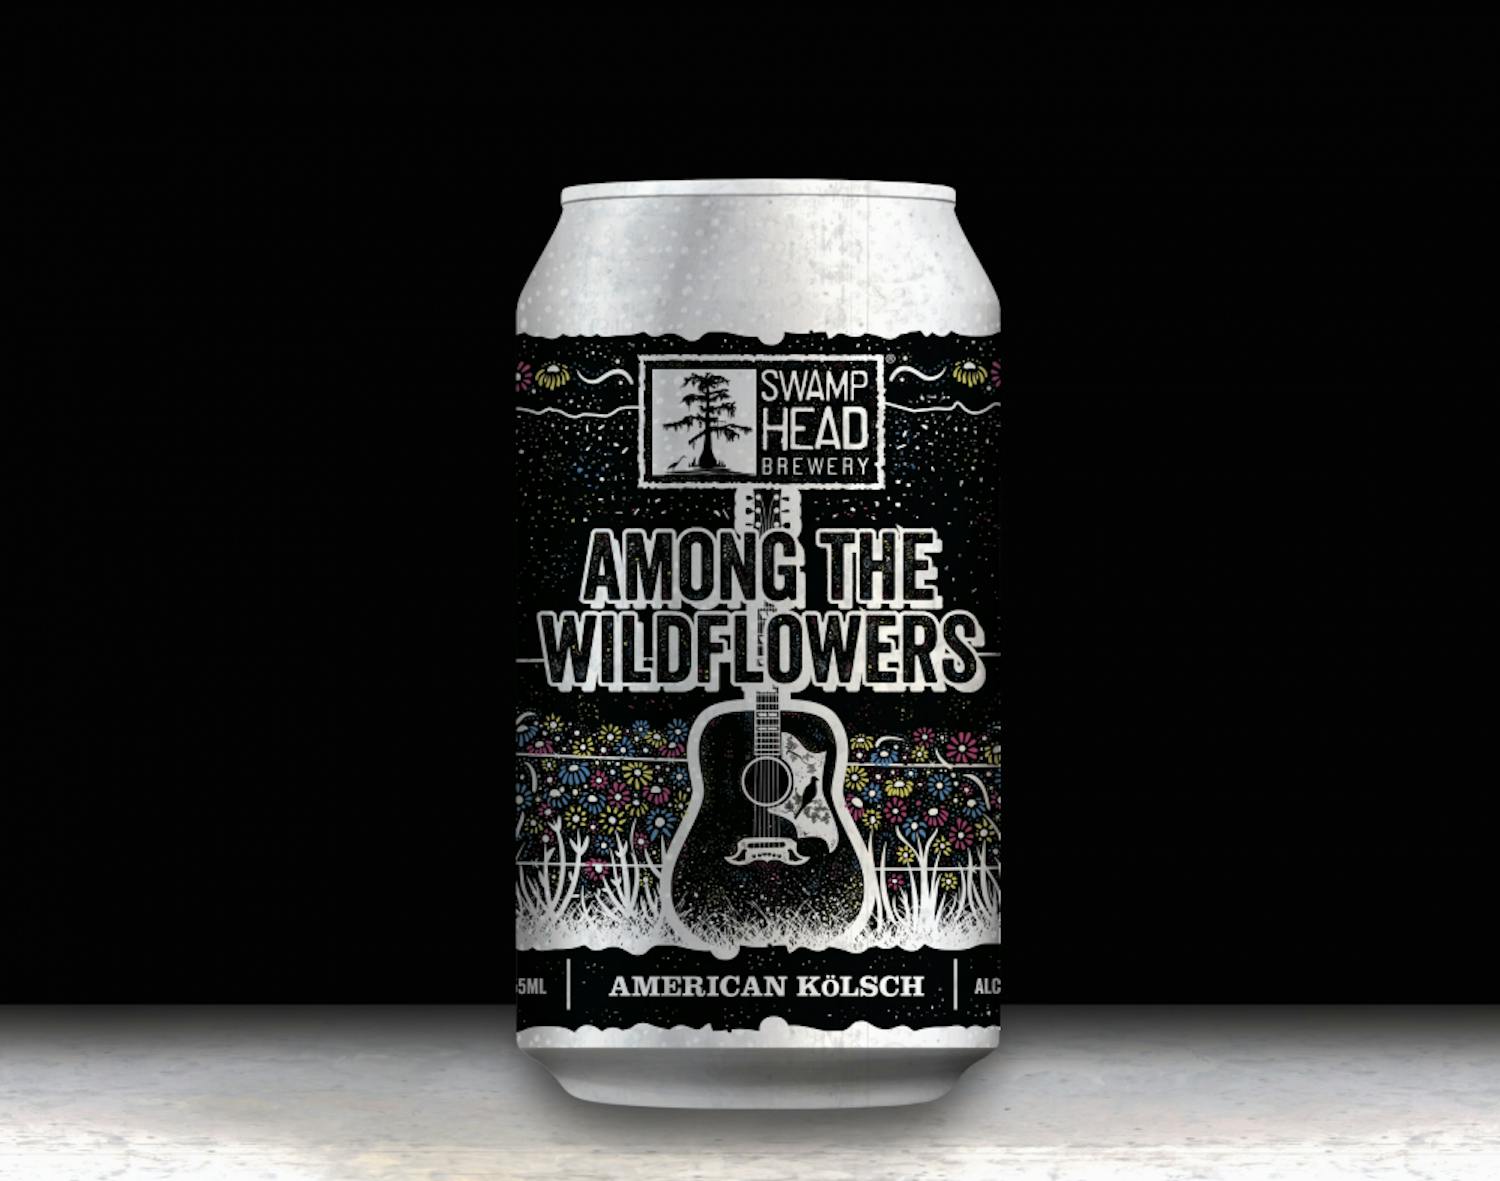 The can for the new Tom Petty-inspired beer.